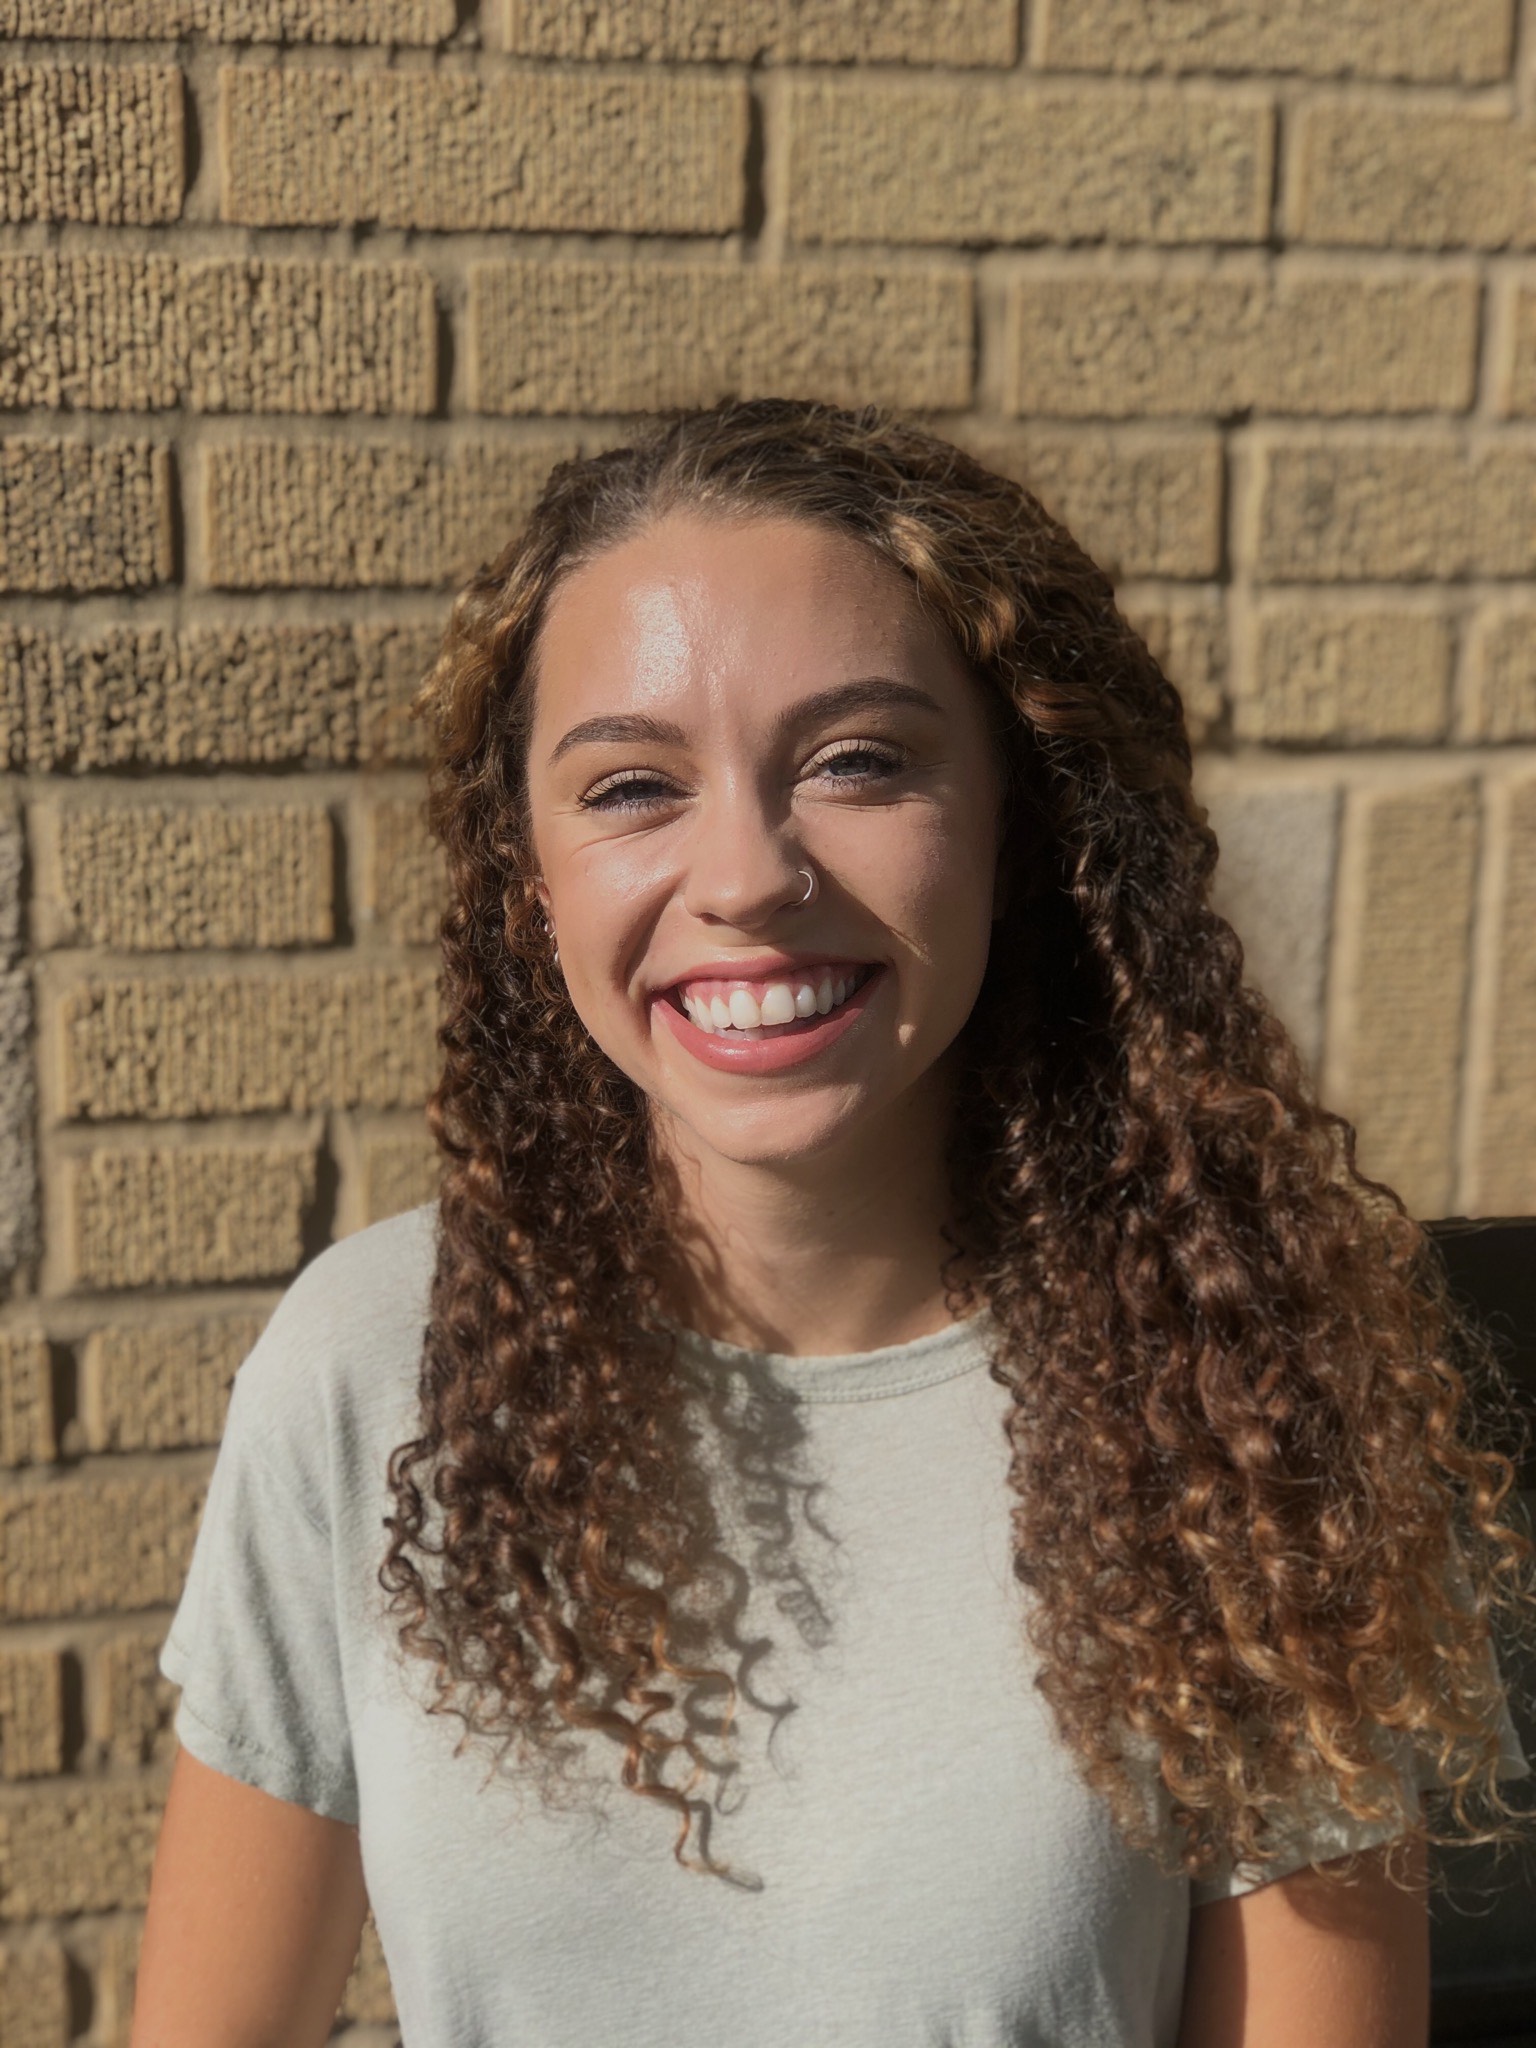 Student with curly brown hair and gray t-shirt stands in front of brick wall.